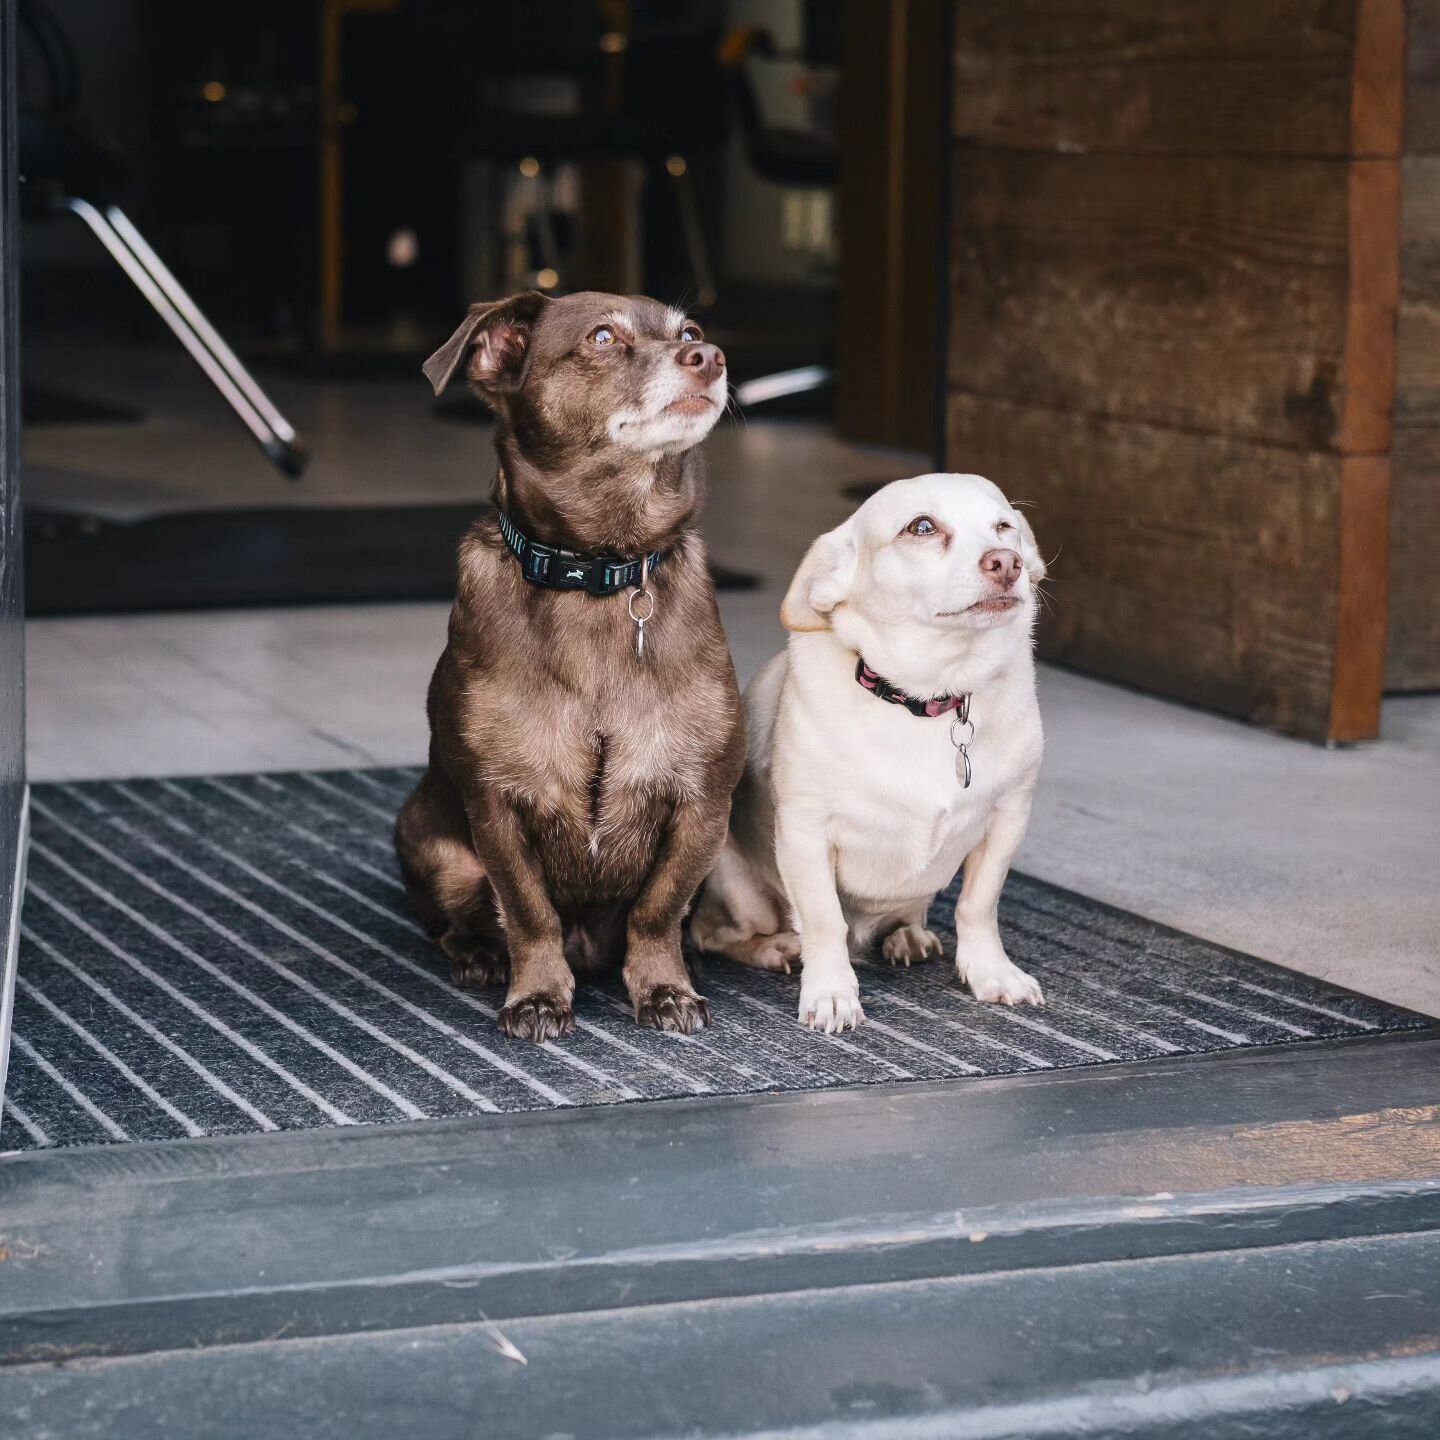 Milo and Otis 🐾
Our shop dogs would like to remind you that we are dog friendly. Feel free to bring your dogs to your appointment 
Photo by @doncraigphoto

#dogsofinstagram #yyjdogs #fernwood #local #dogfriendly